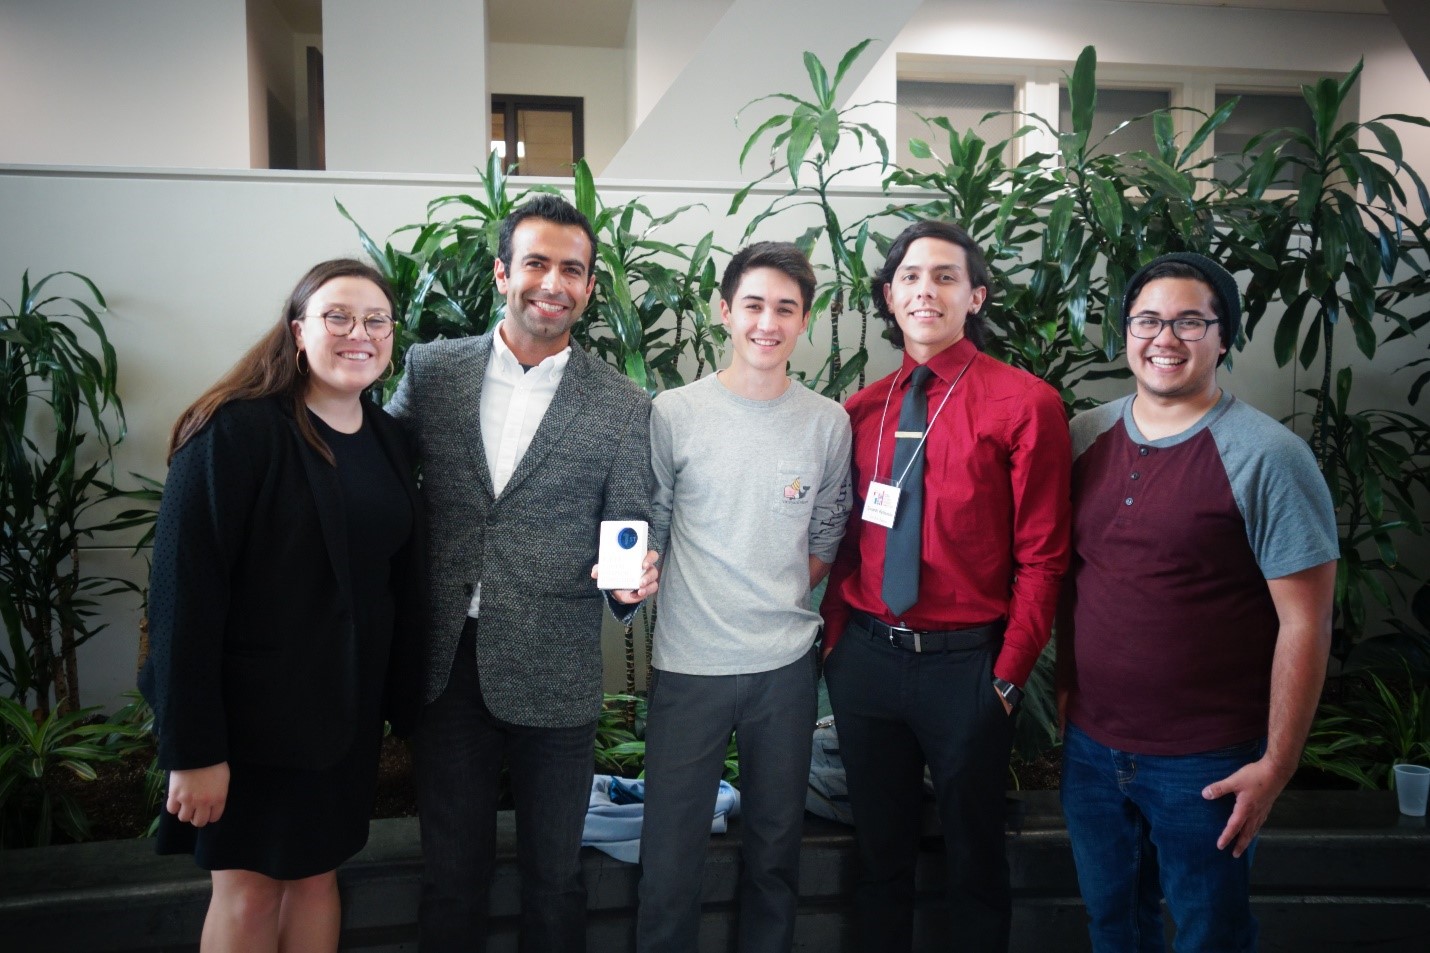 students holding award at research events